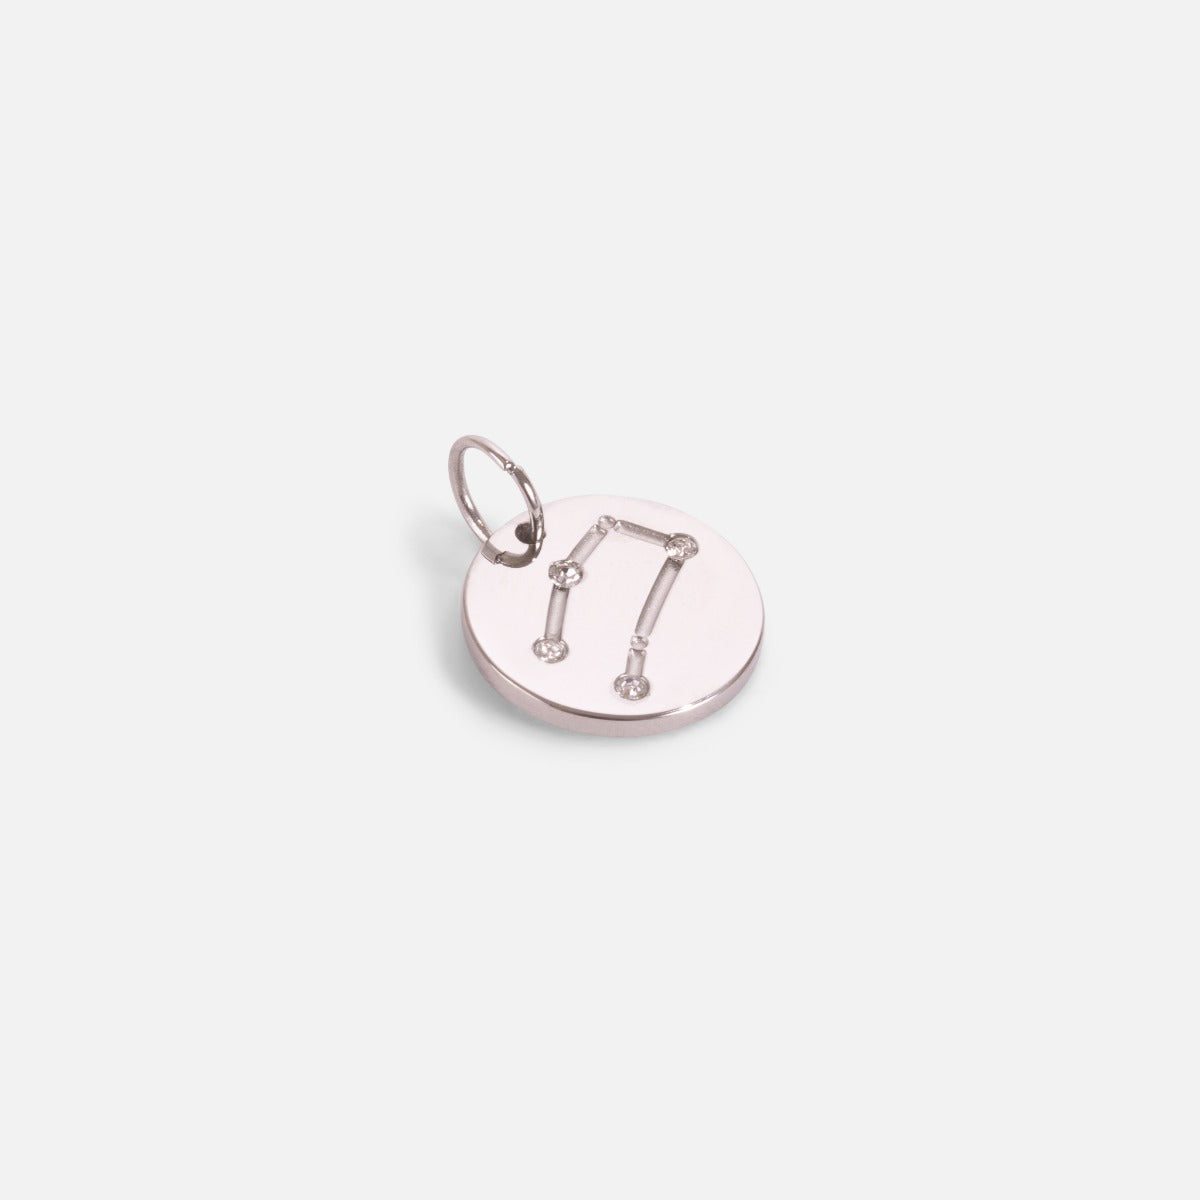 Small silvered charm engraved with the zodiac constellation "gemini"